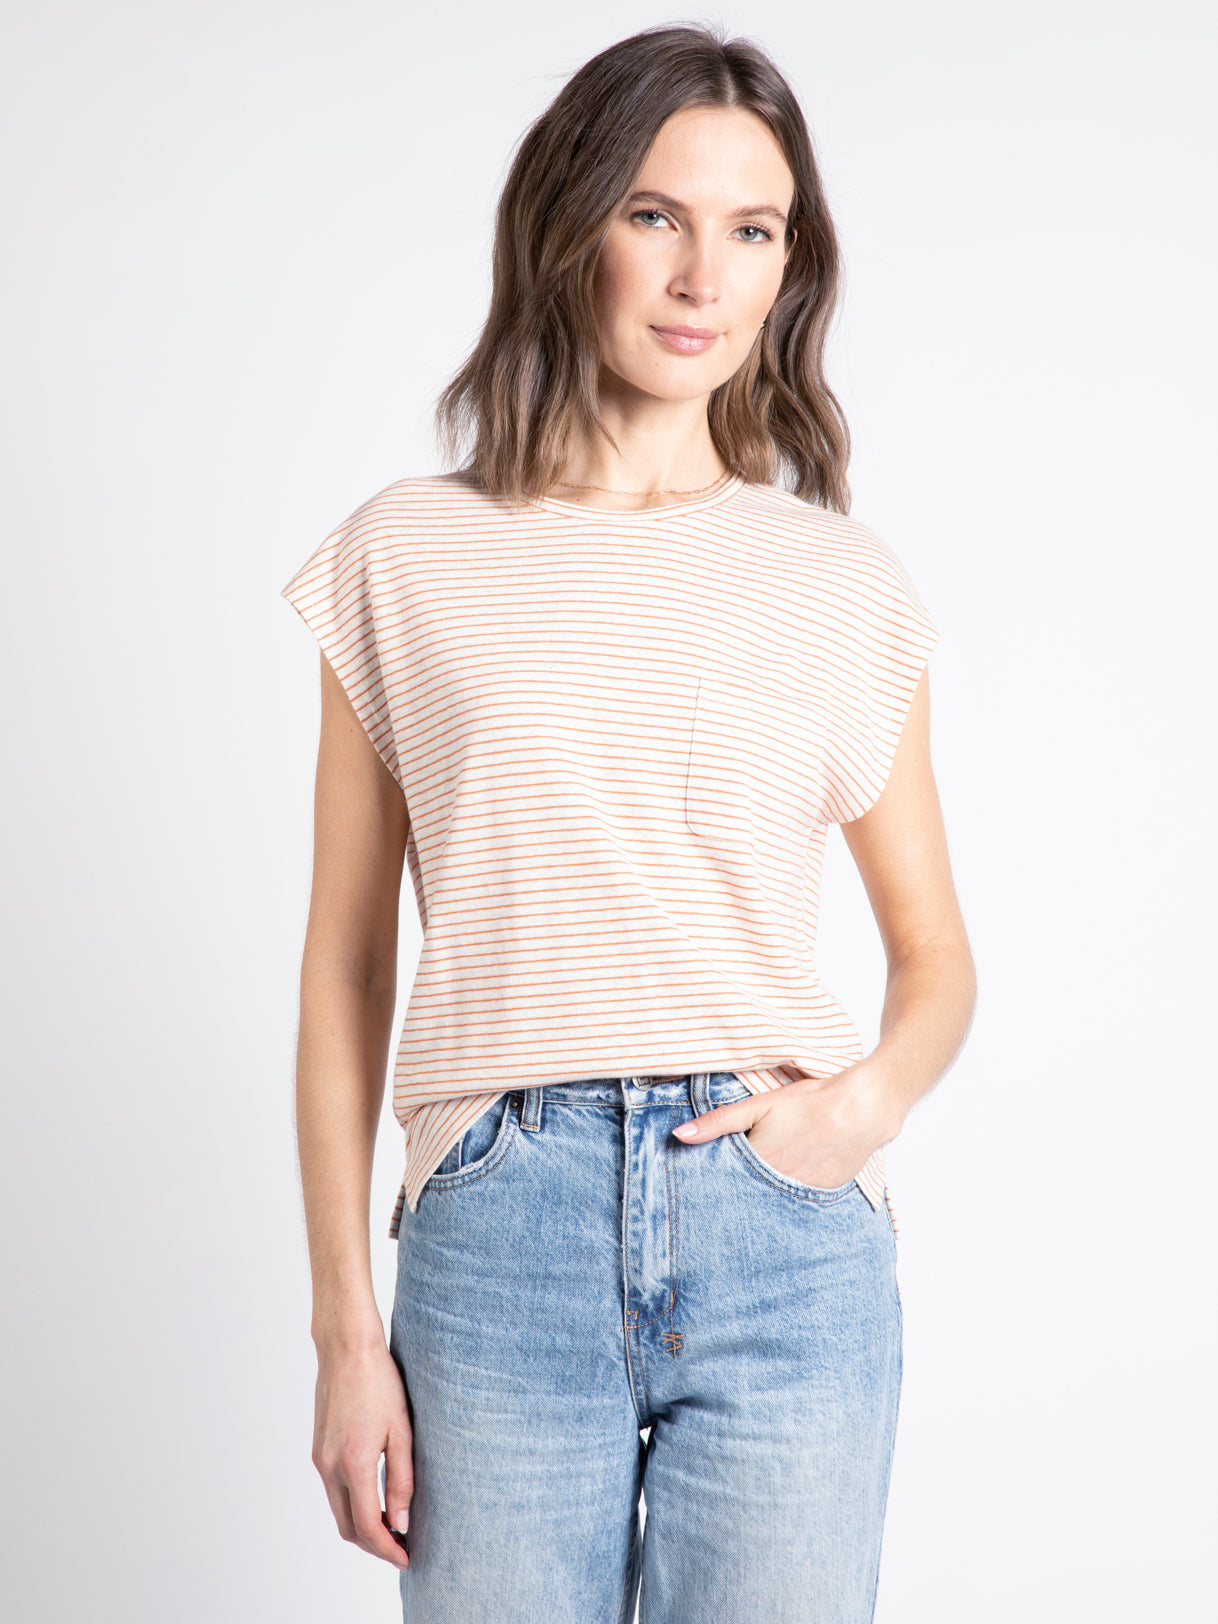 Off White/Sienna Striped Short Sleeve Top Apex Ethical Boutique